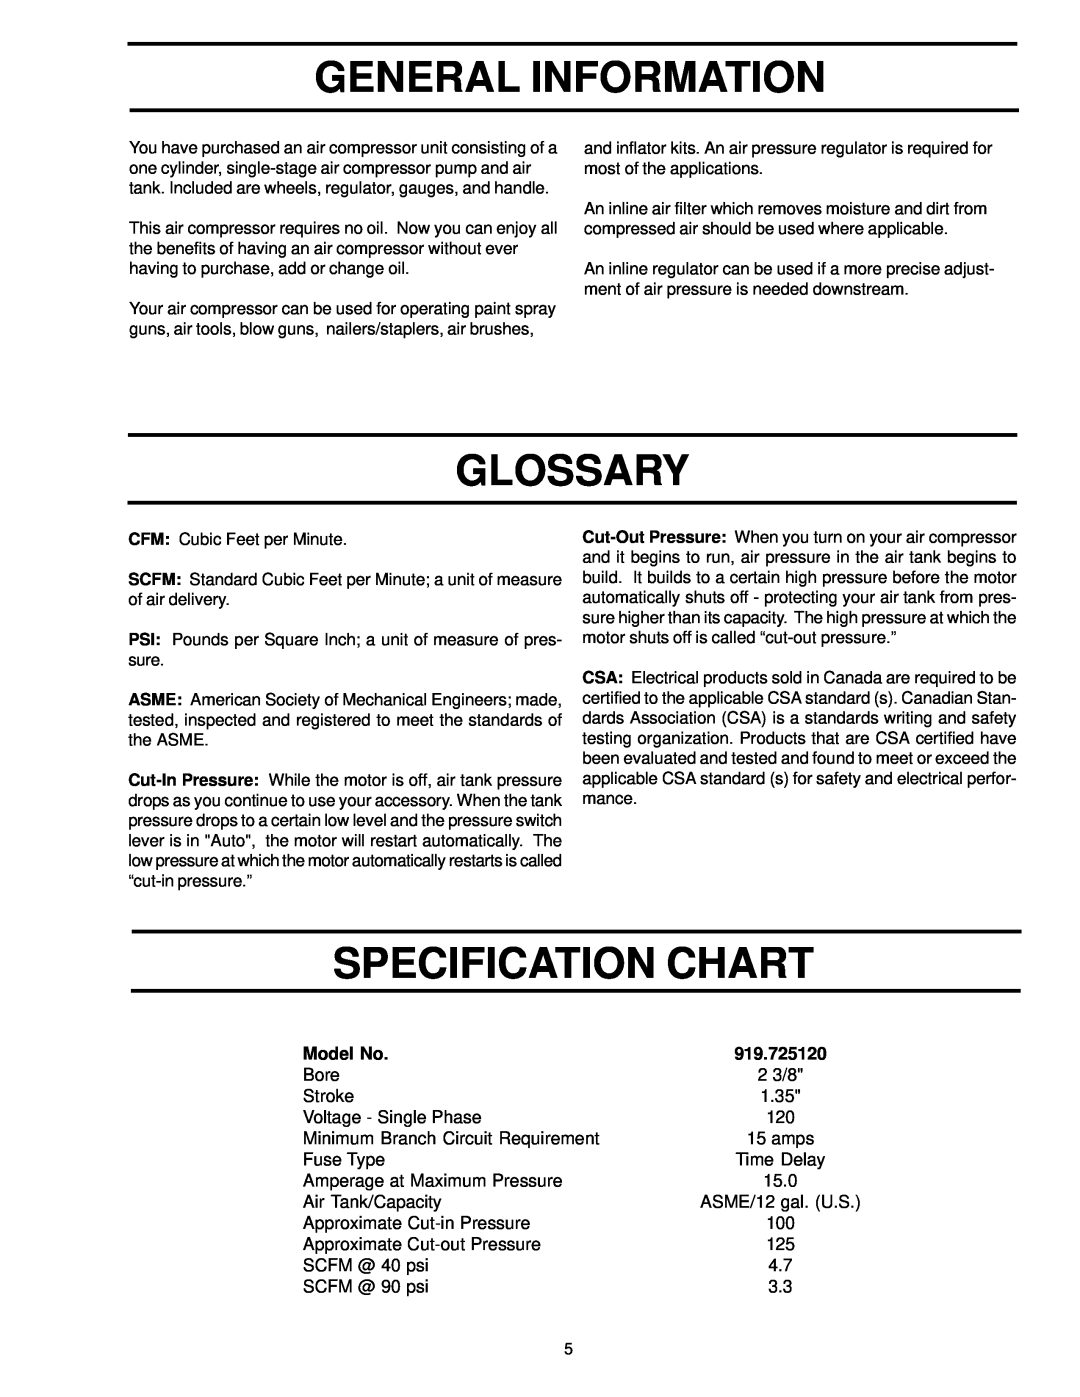 Sears owner manual General Information, Glossary, Specification Chart, Model No, 919.725120 